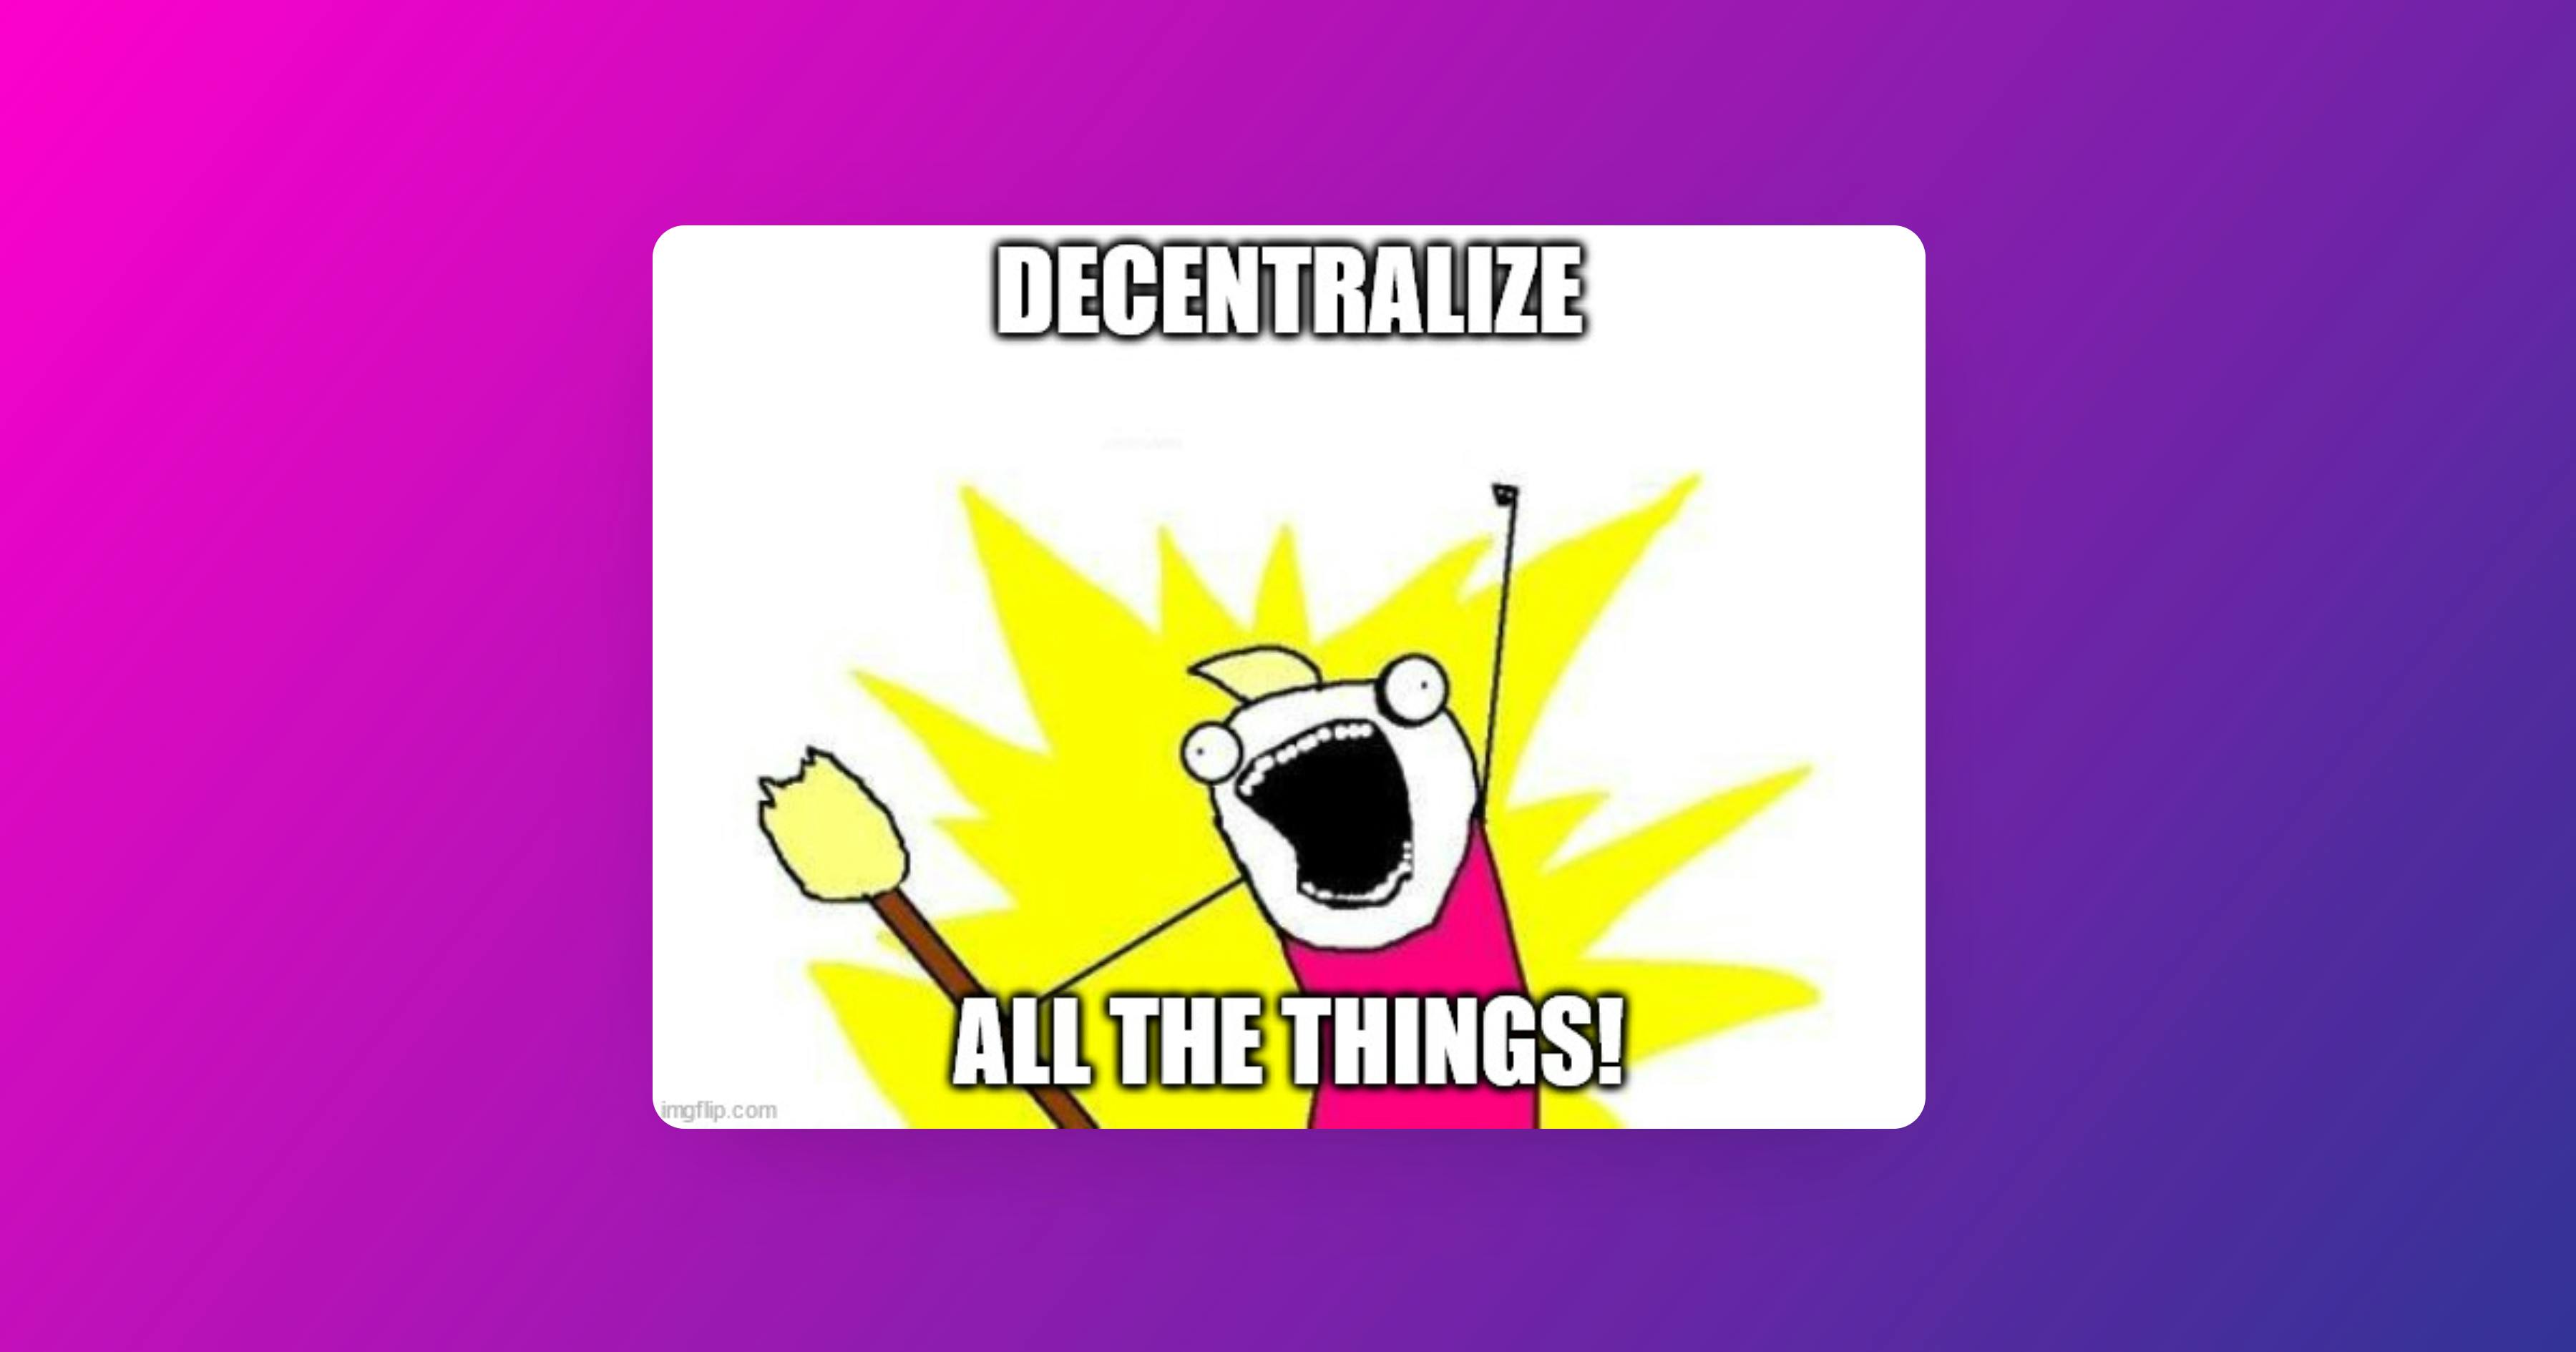 Decentralize all the things!